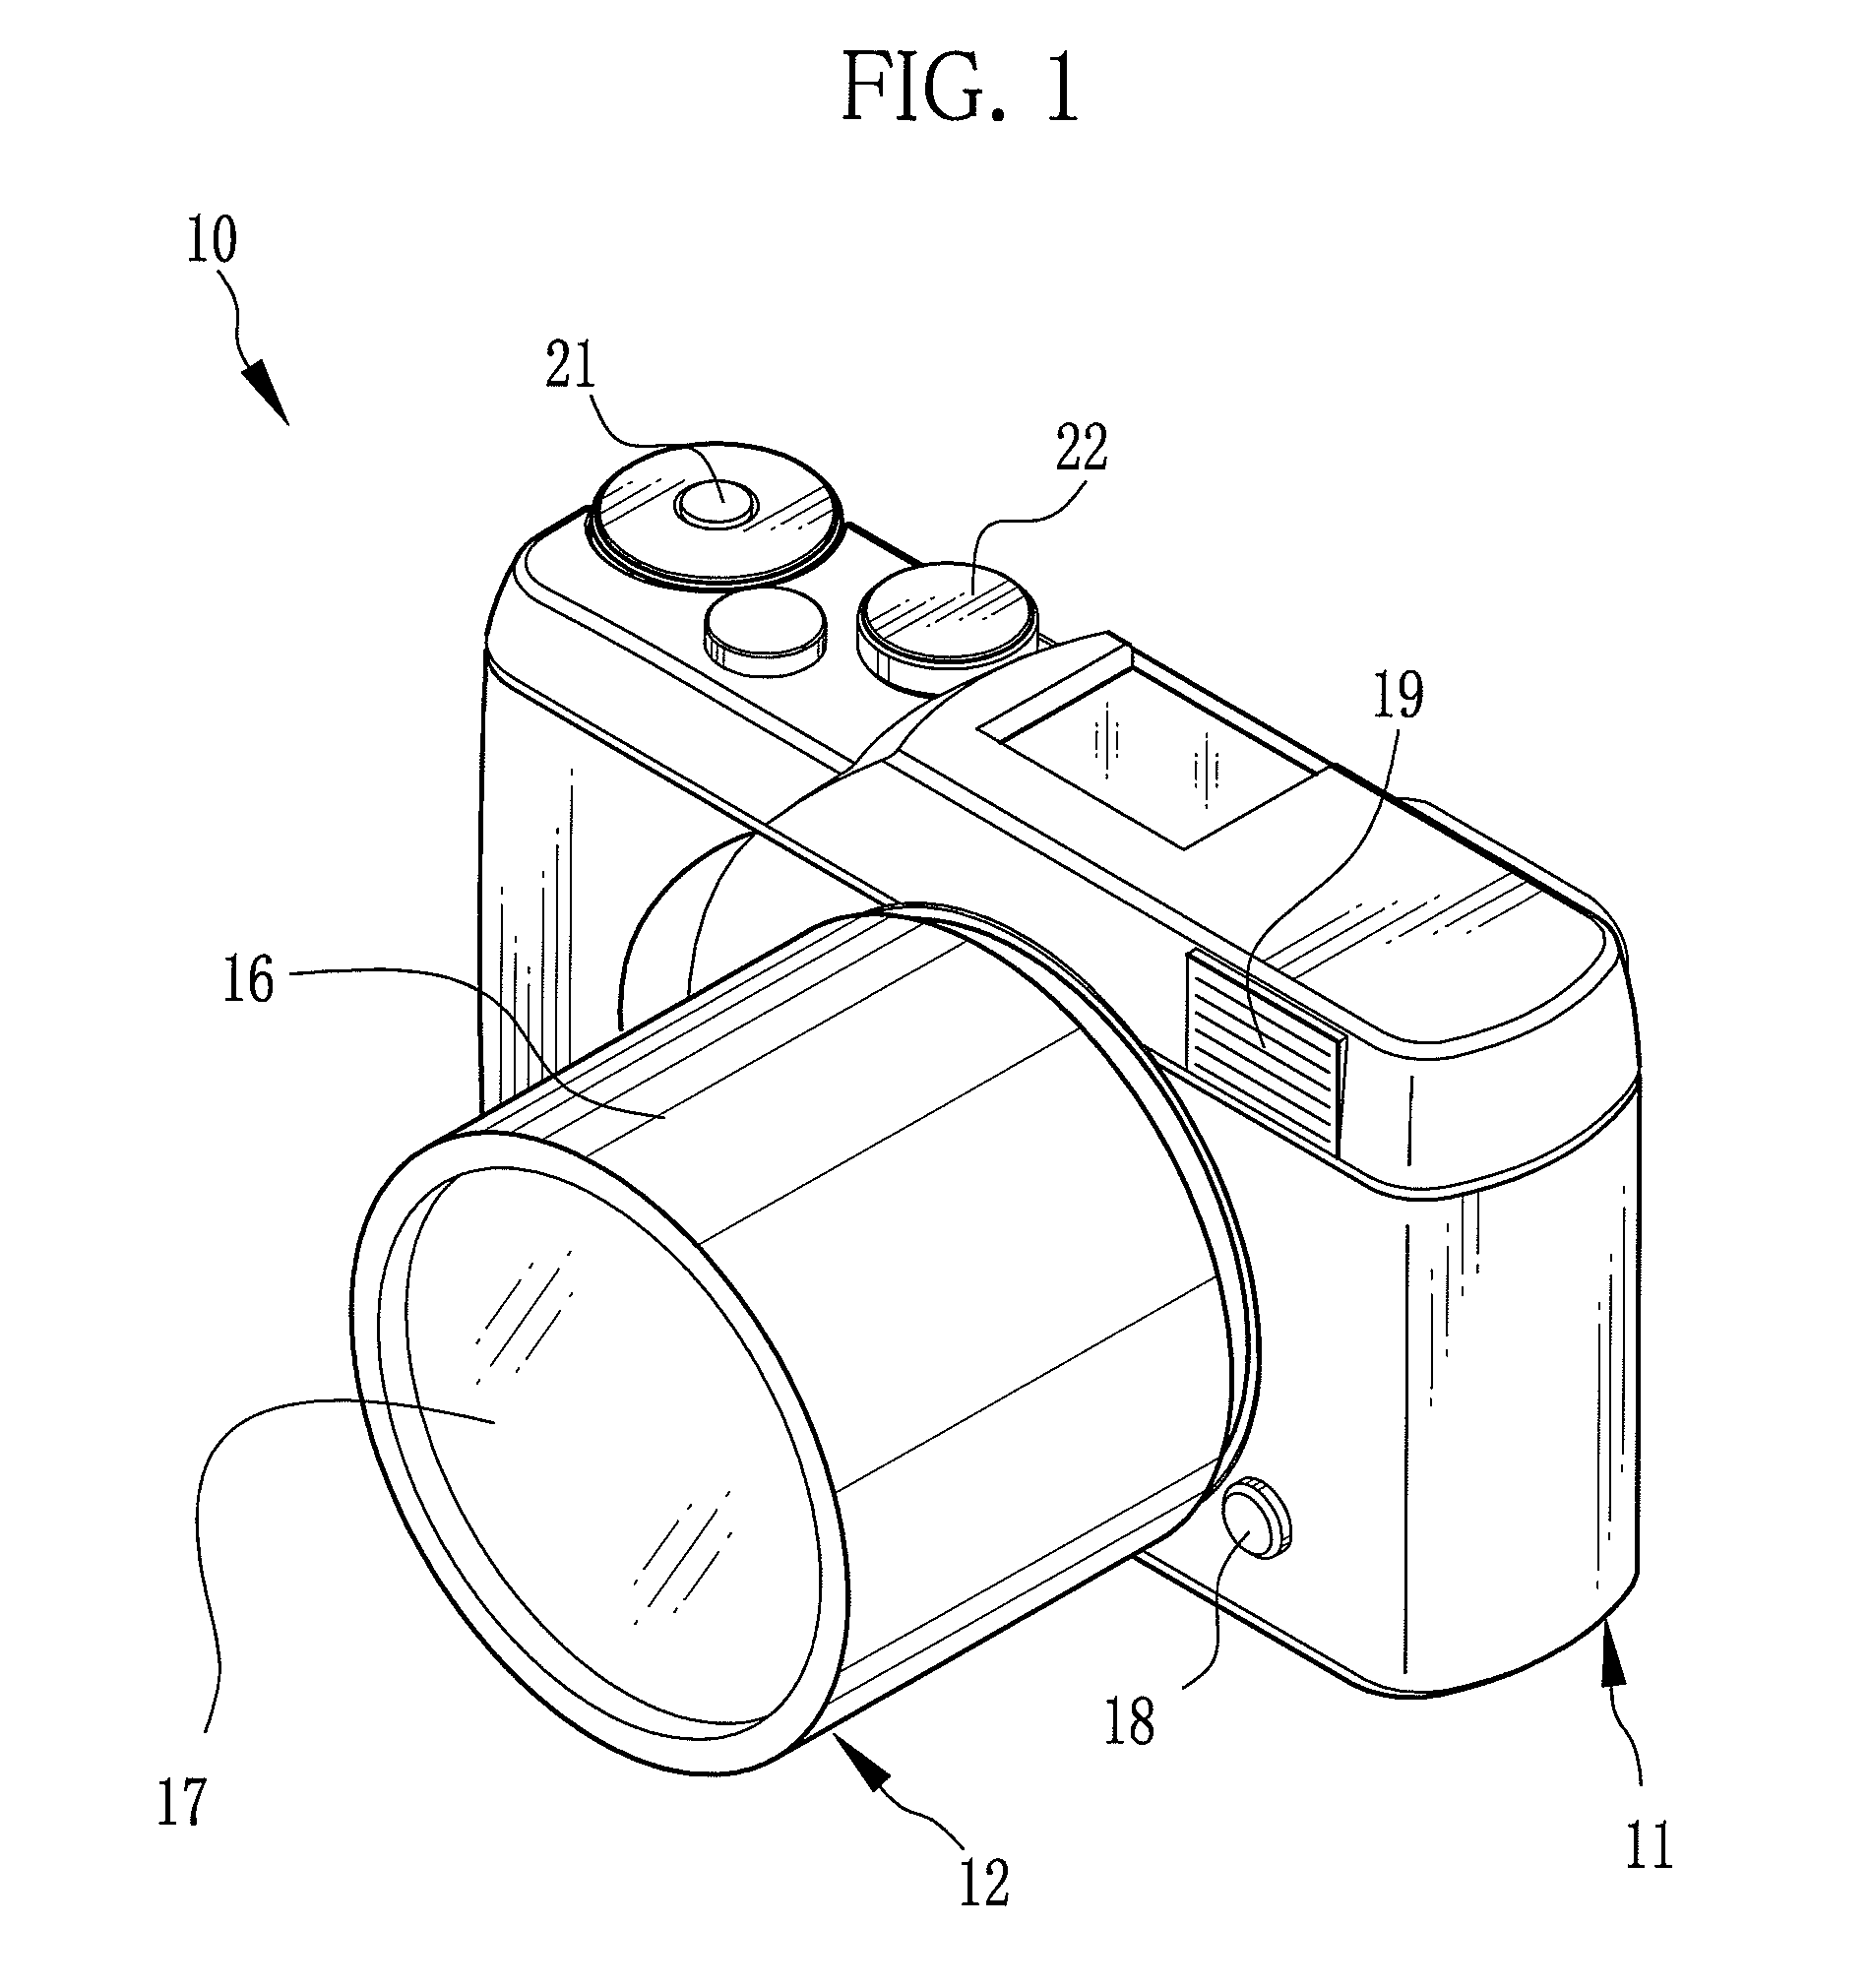 Imaging apparatus for correcting optical distortion and wide-angle distortion